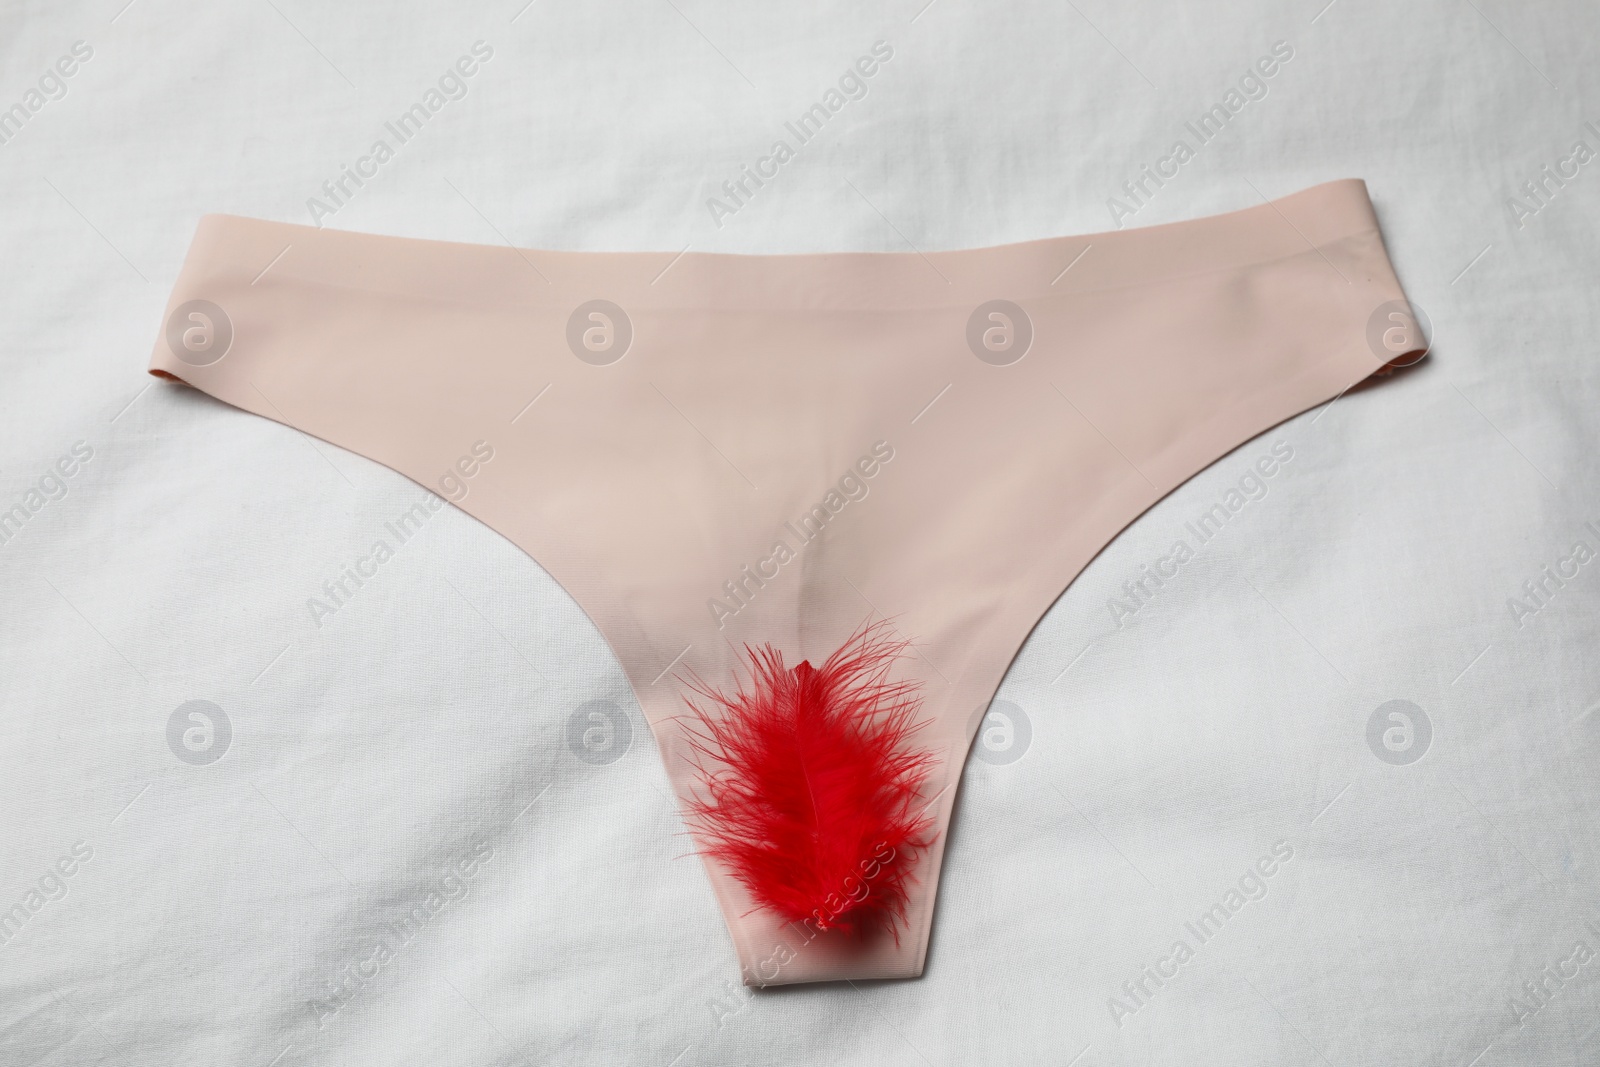 Photo of Woman's panties with red feather on white fabric, top view